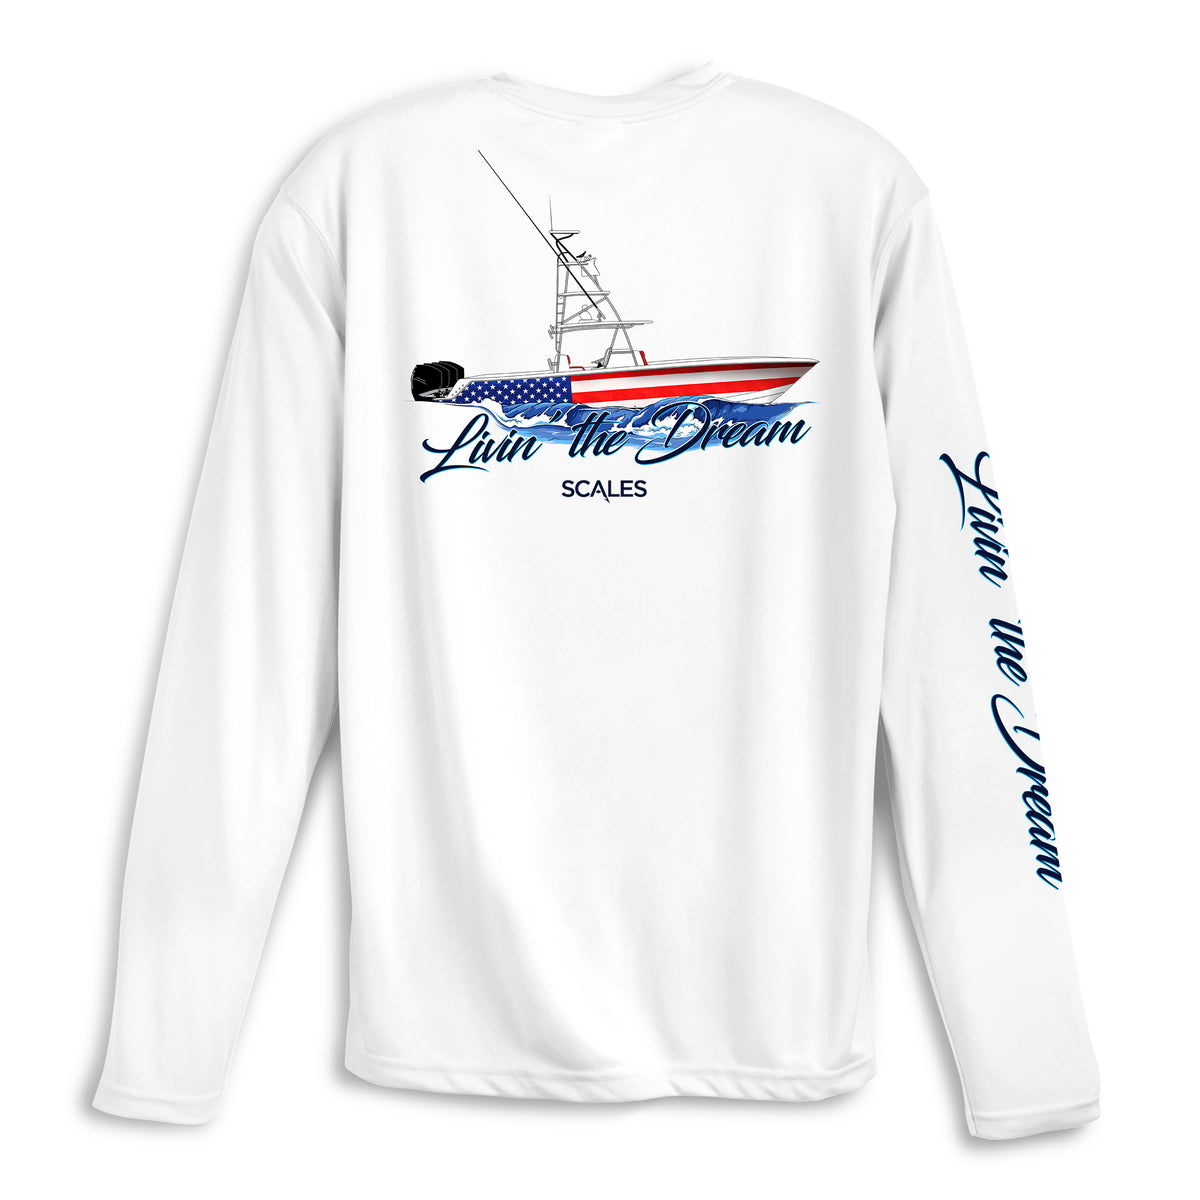 SCALES Living The Dream Long Sleeve Performance Shirt